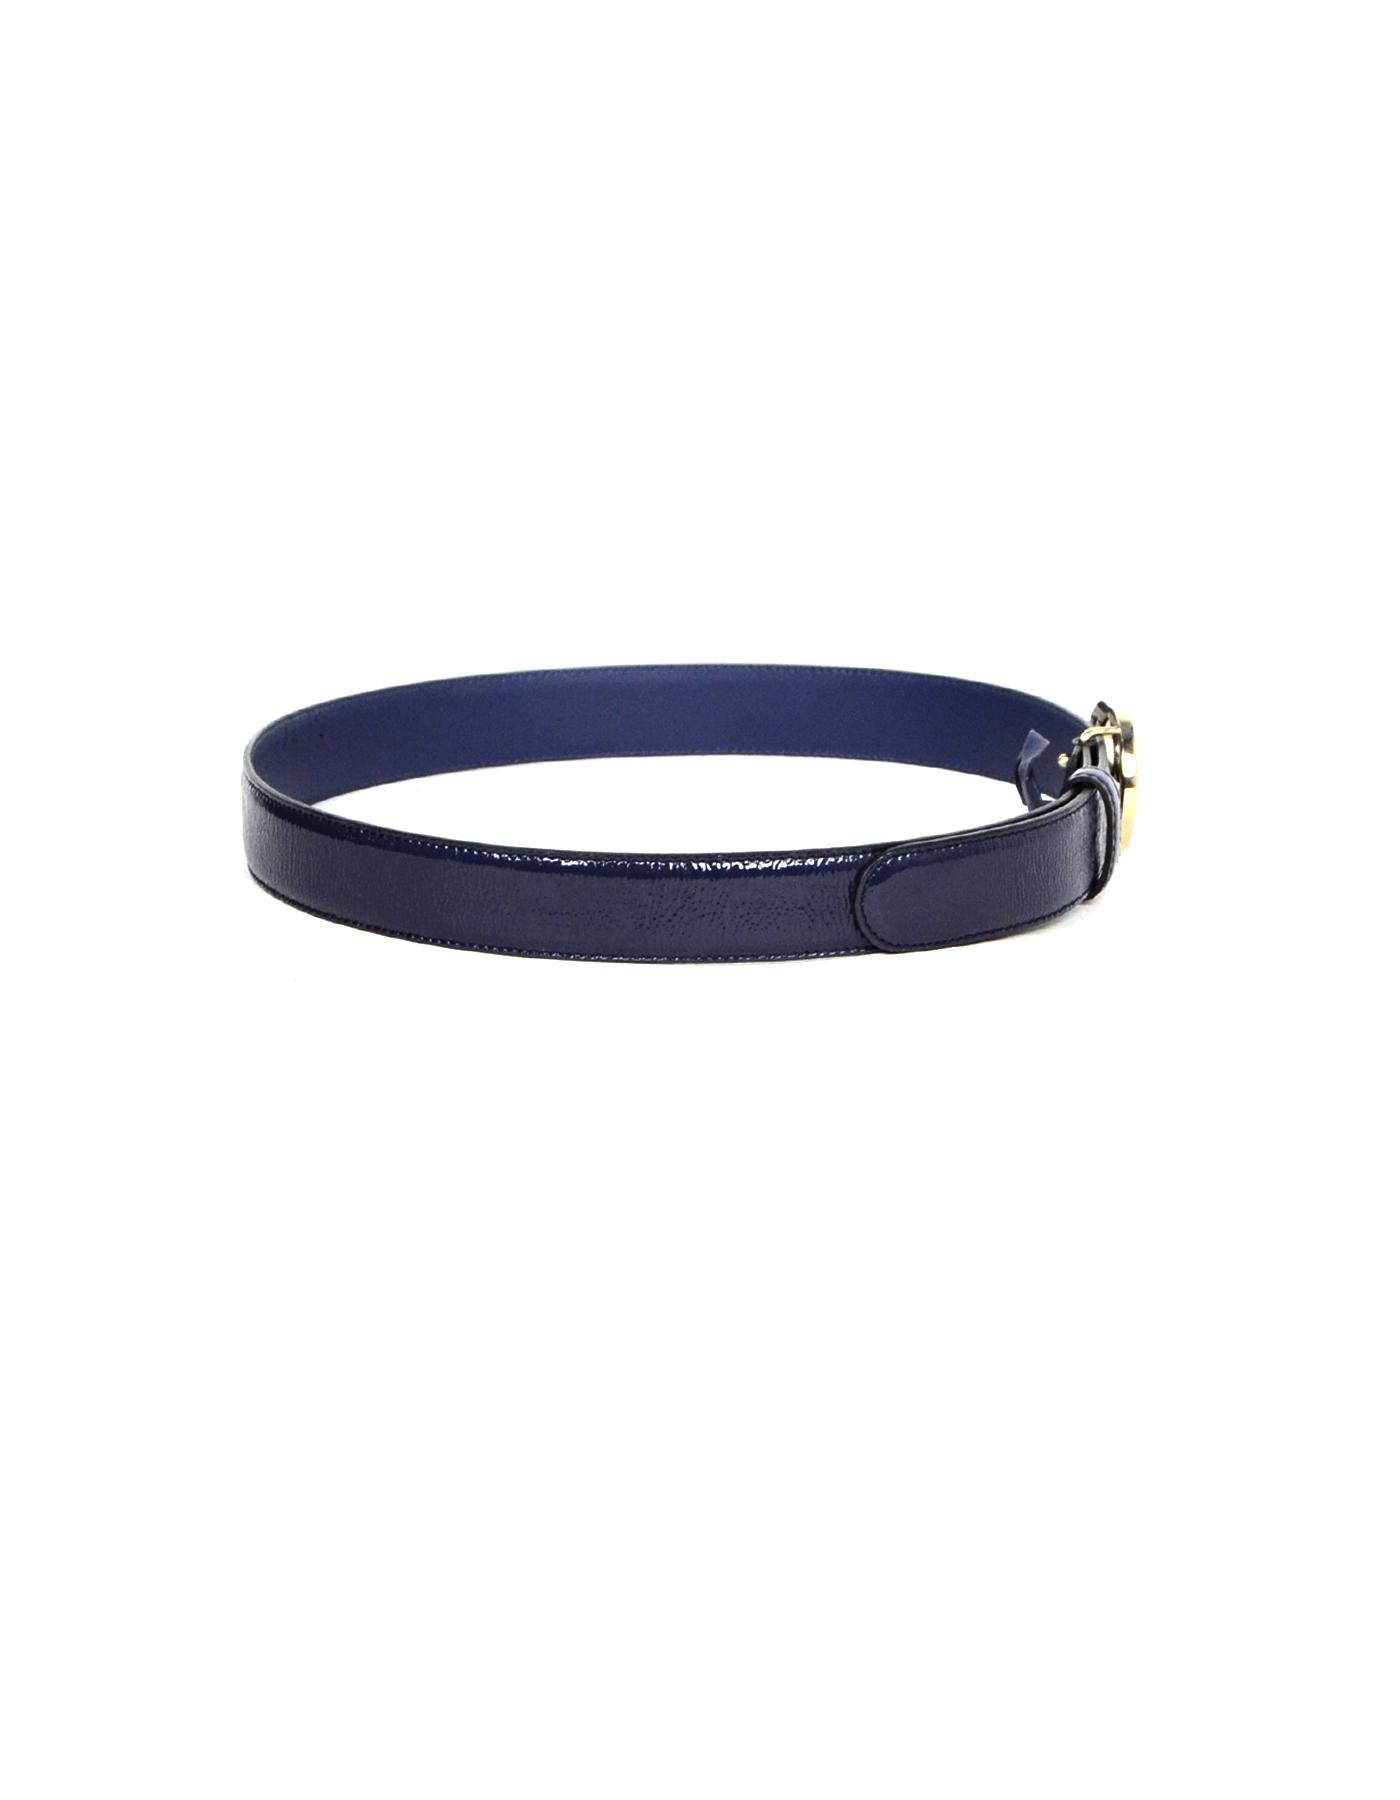 Gucci Navy Patent Interlocking GG Belt sz 85-34 In Excellent Condition In New York, NY